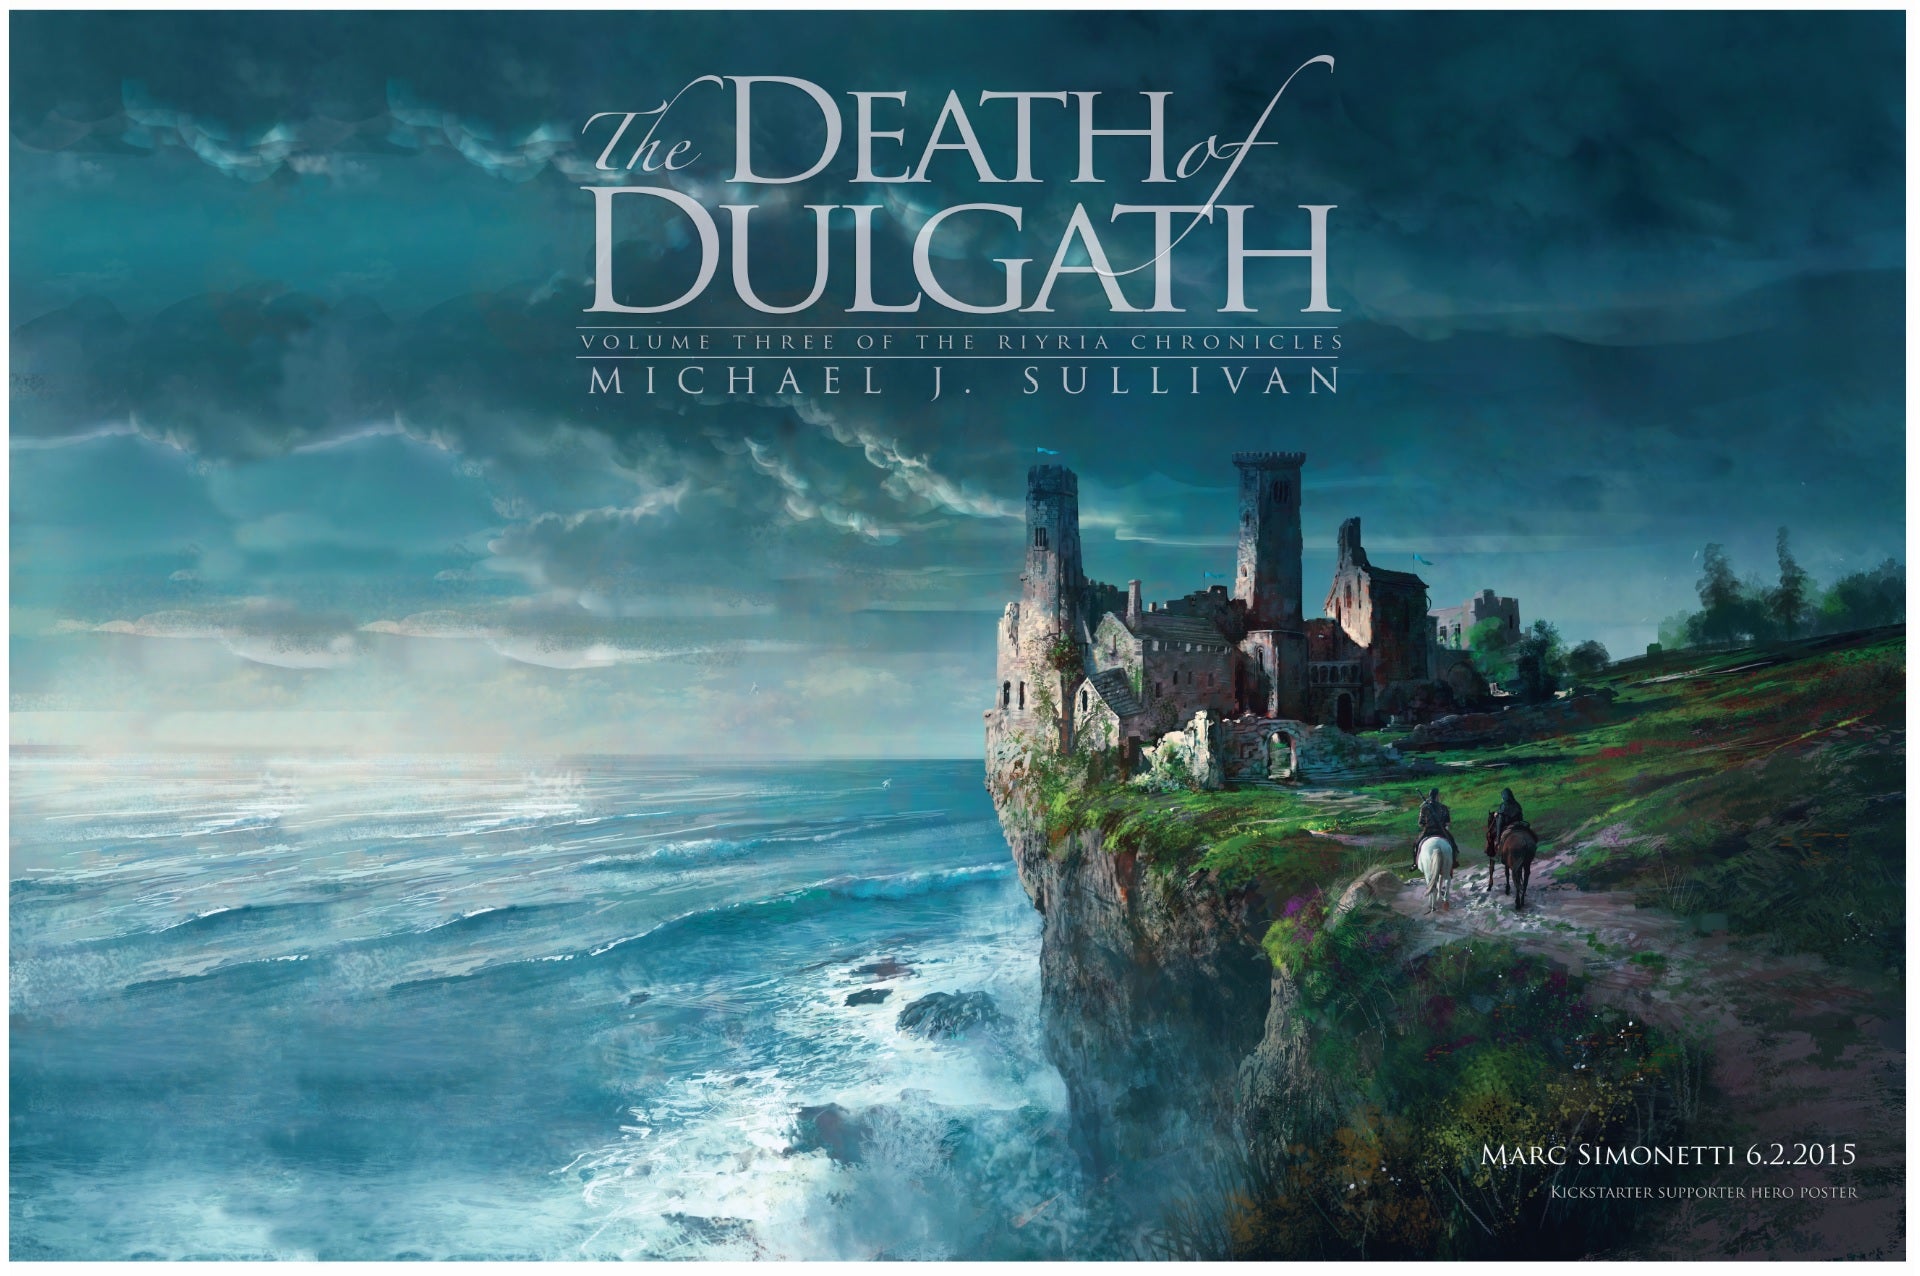 Book Review: The Death of Dulgath by Michael Sullivan